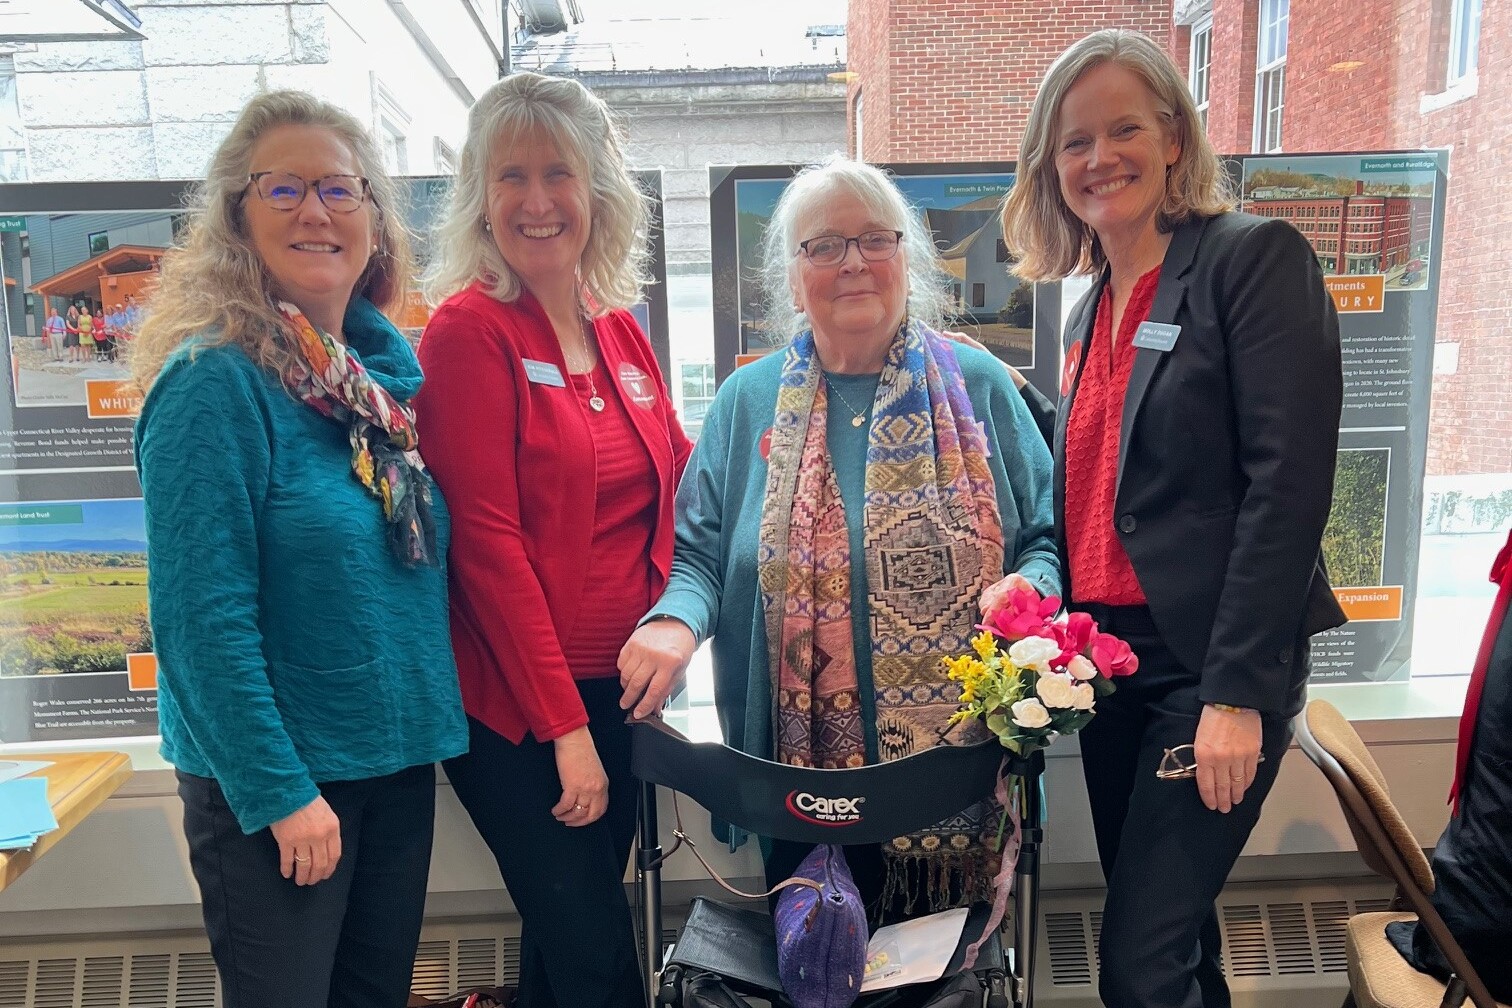 Director of Real Estate Development Cindy Reid, CEO Kim Fitzgerald, CS Resident & SASH Participant Penny Pero, and Director of Policy & Strategic Initiatives Molly Dugan at the State House for Vermont Housing and Conservation Coalition day.